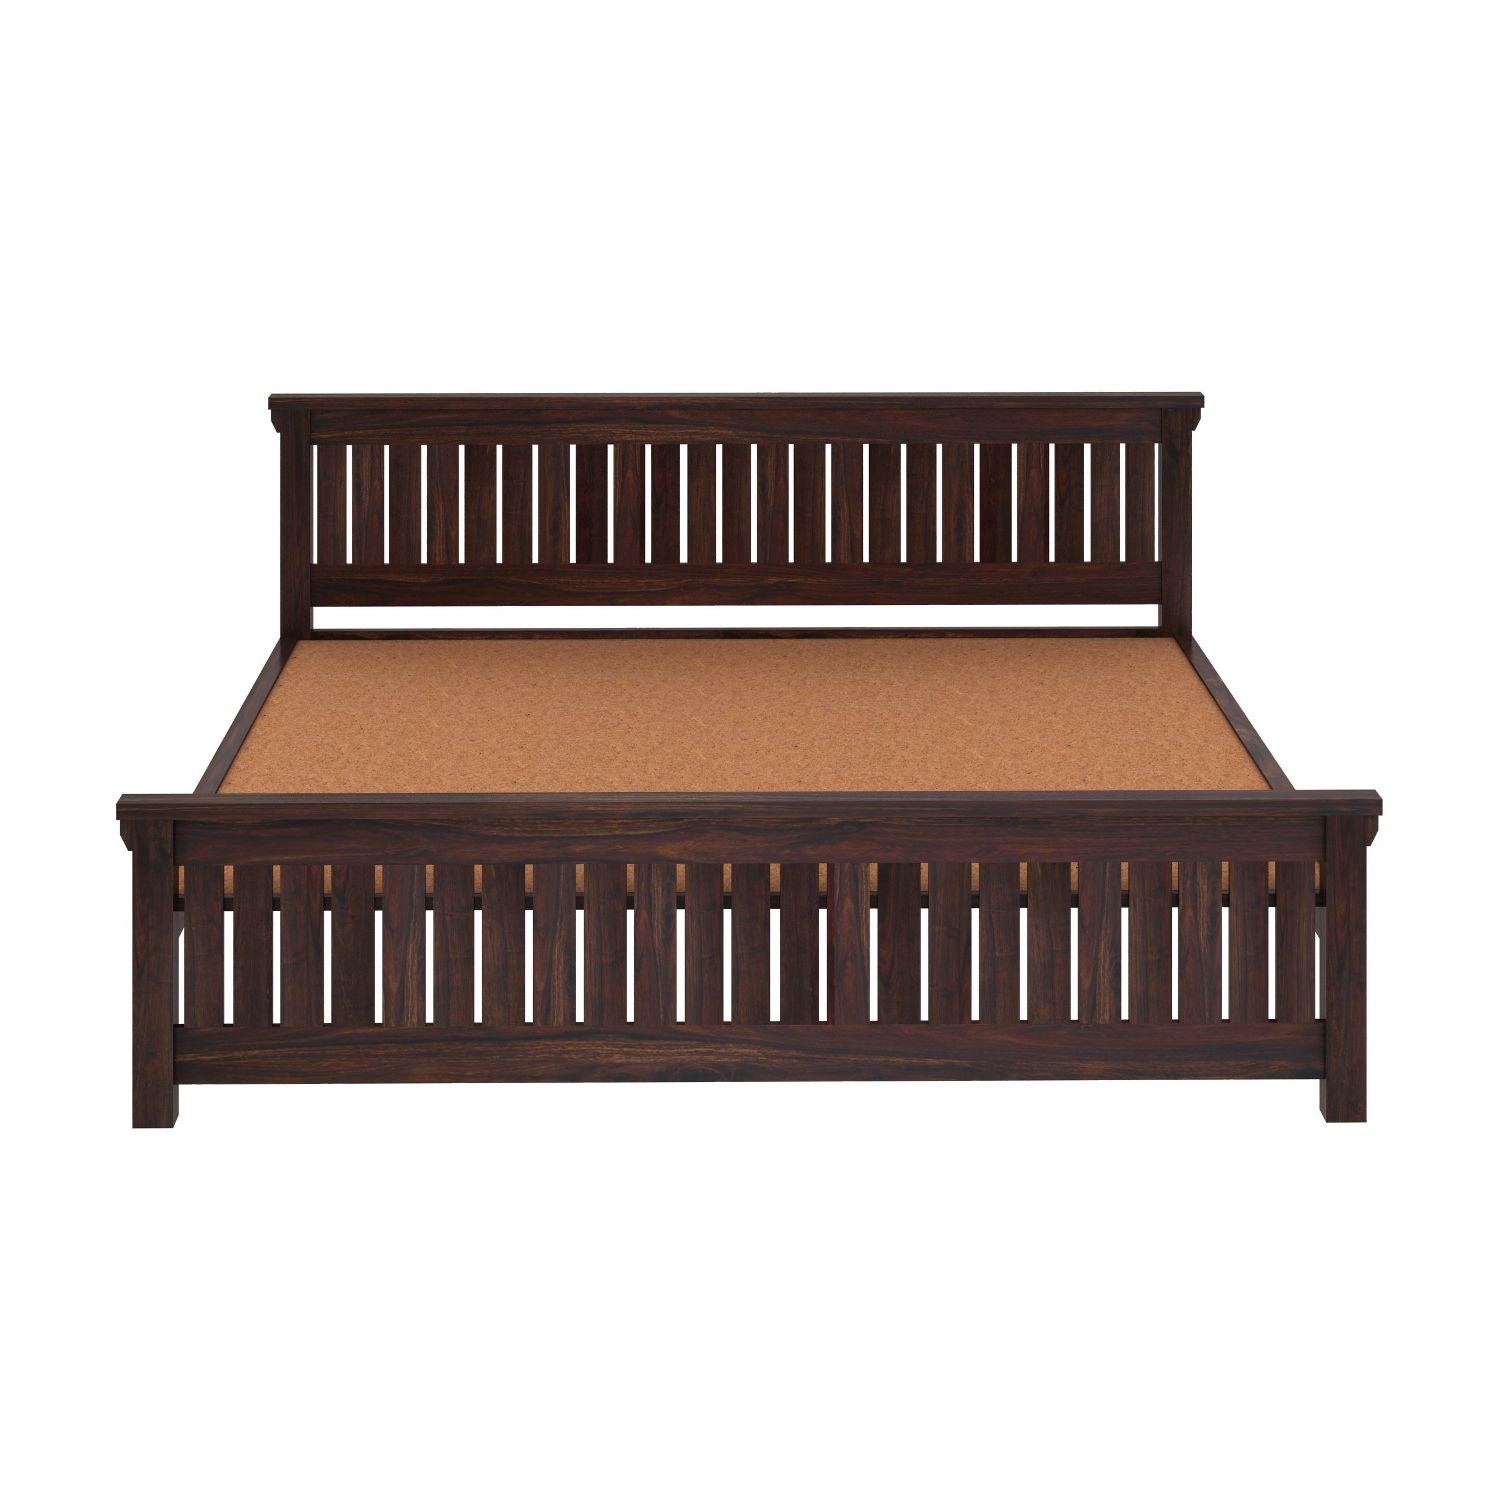 Trinity Solid Sheesham Wood Bed Without Storage (Queen Size, Walnut Finish)